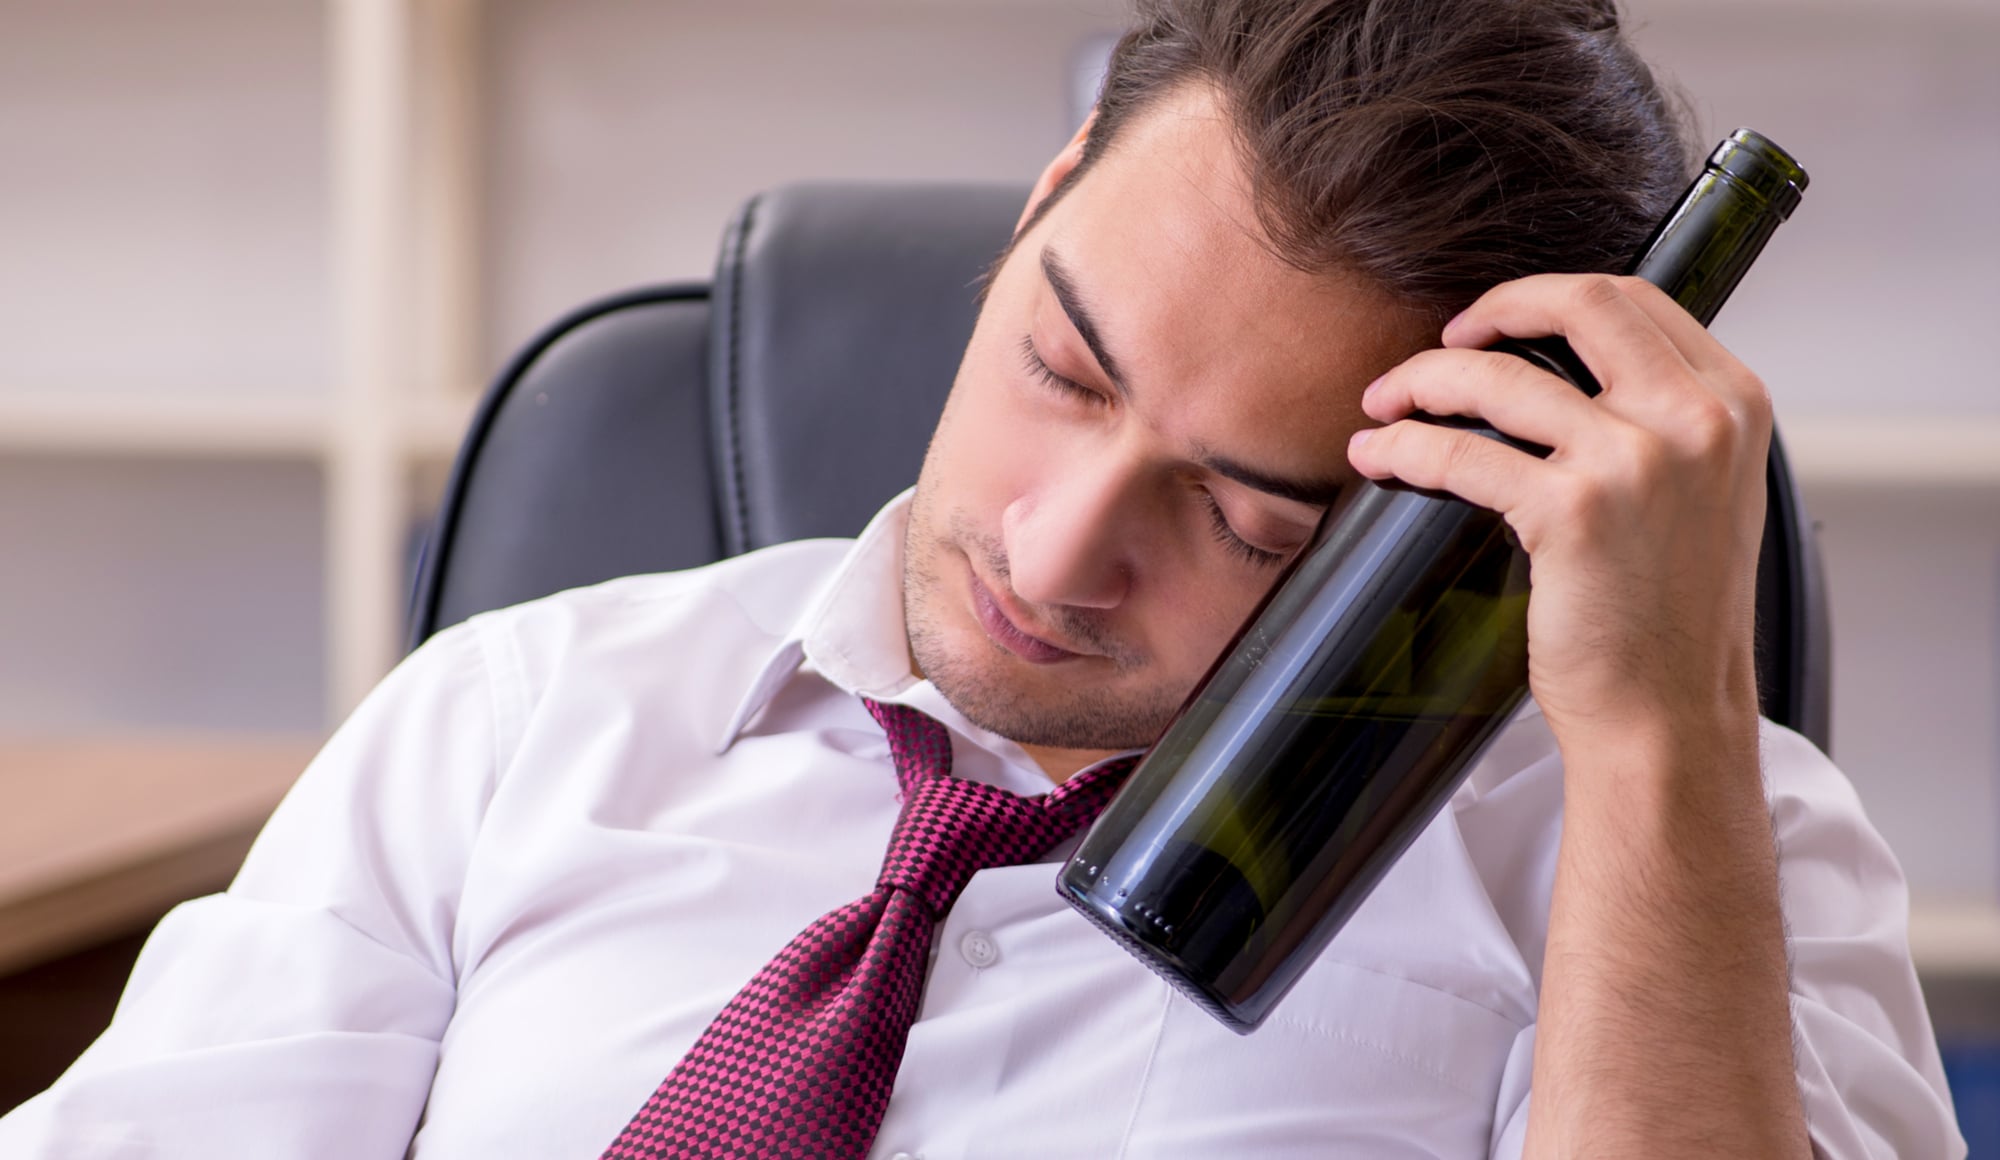 The Alarming Rates of Alcoholism Among Lawyers Pathfinders Recovery Center - A middle-aged man who works as lawyer is sitting at his desk with a bottle of alcohol as he tries to deny his alcoholism issues.